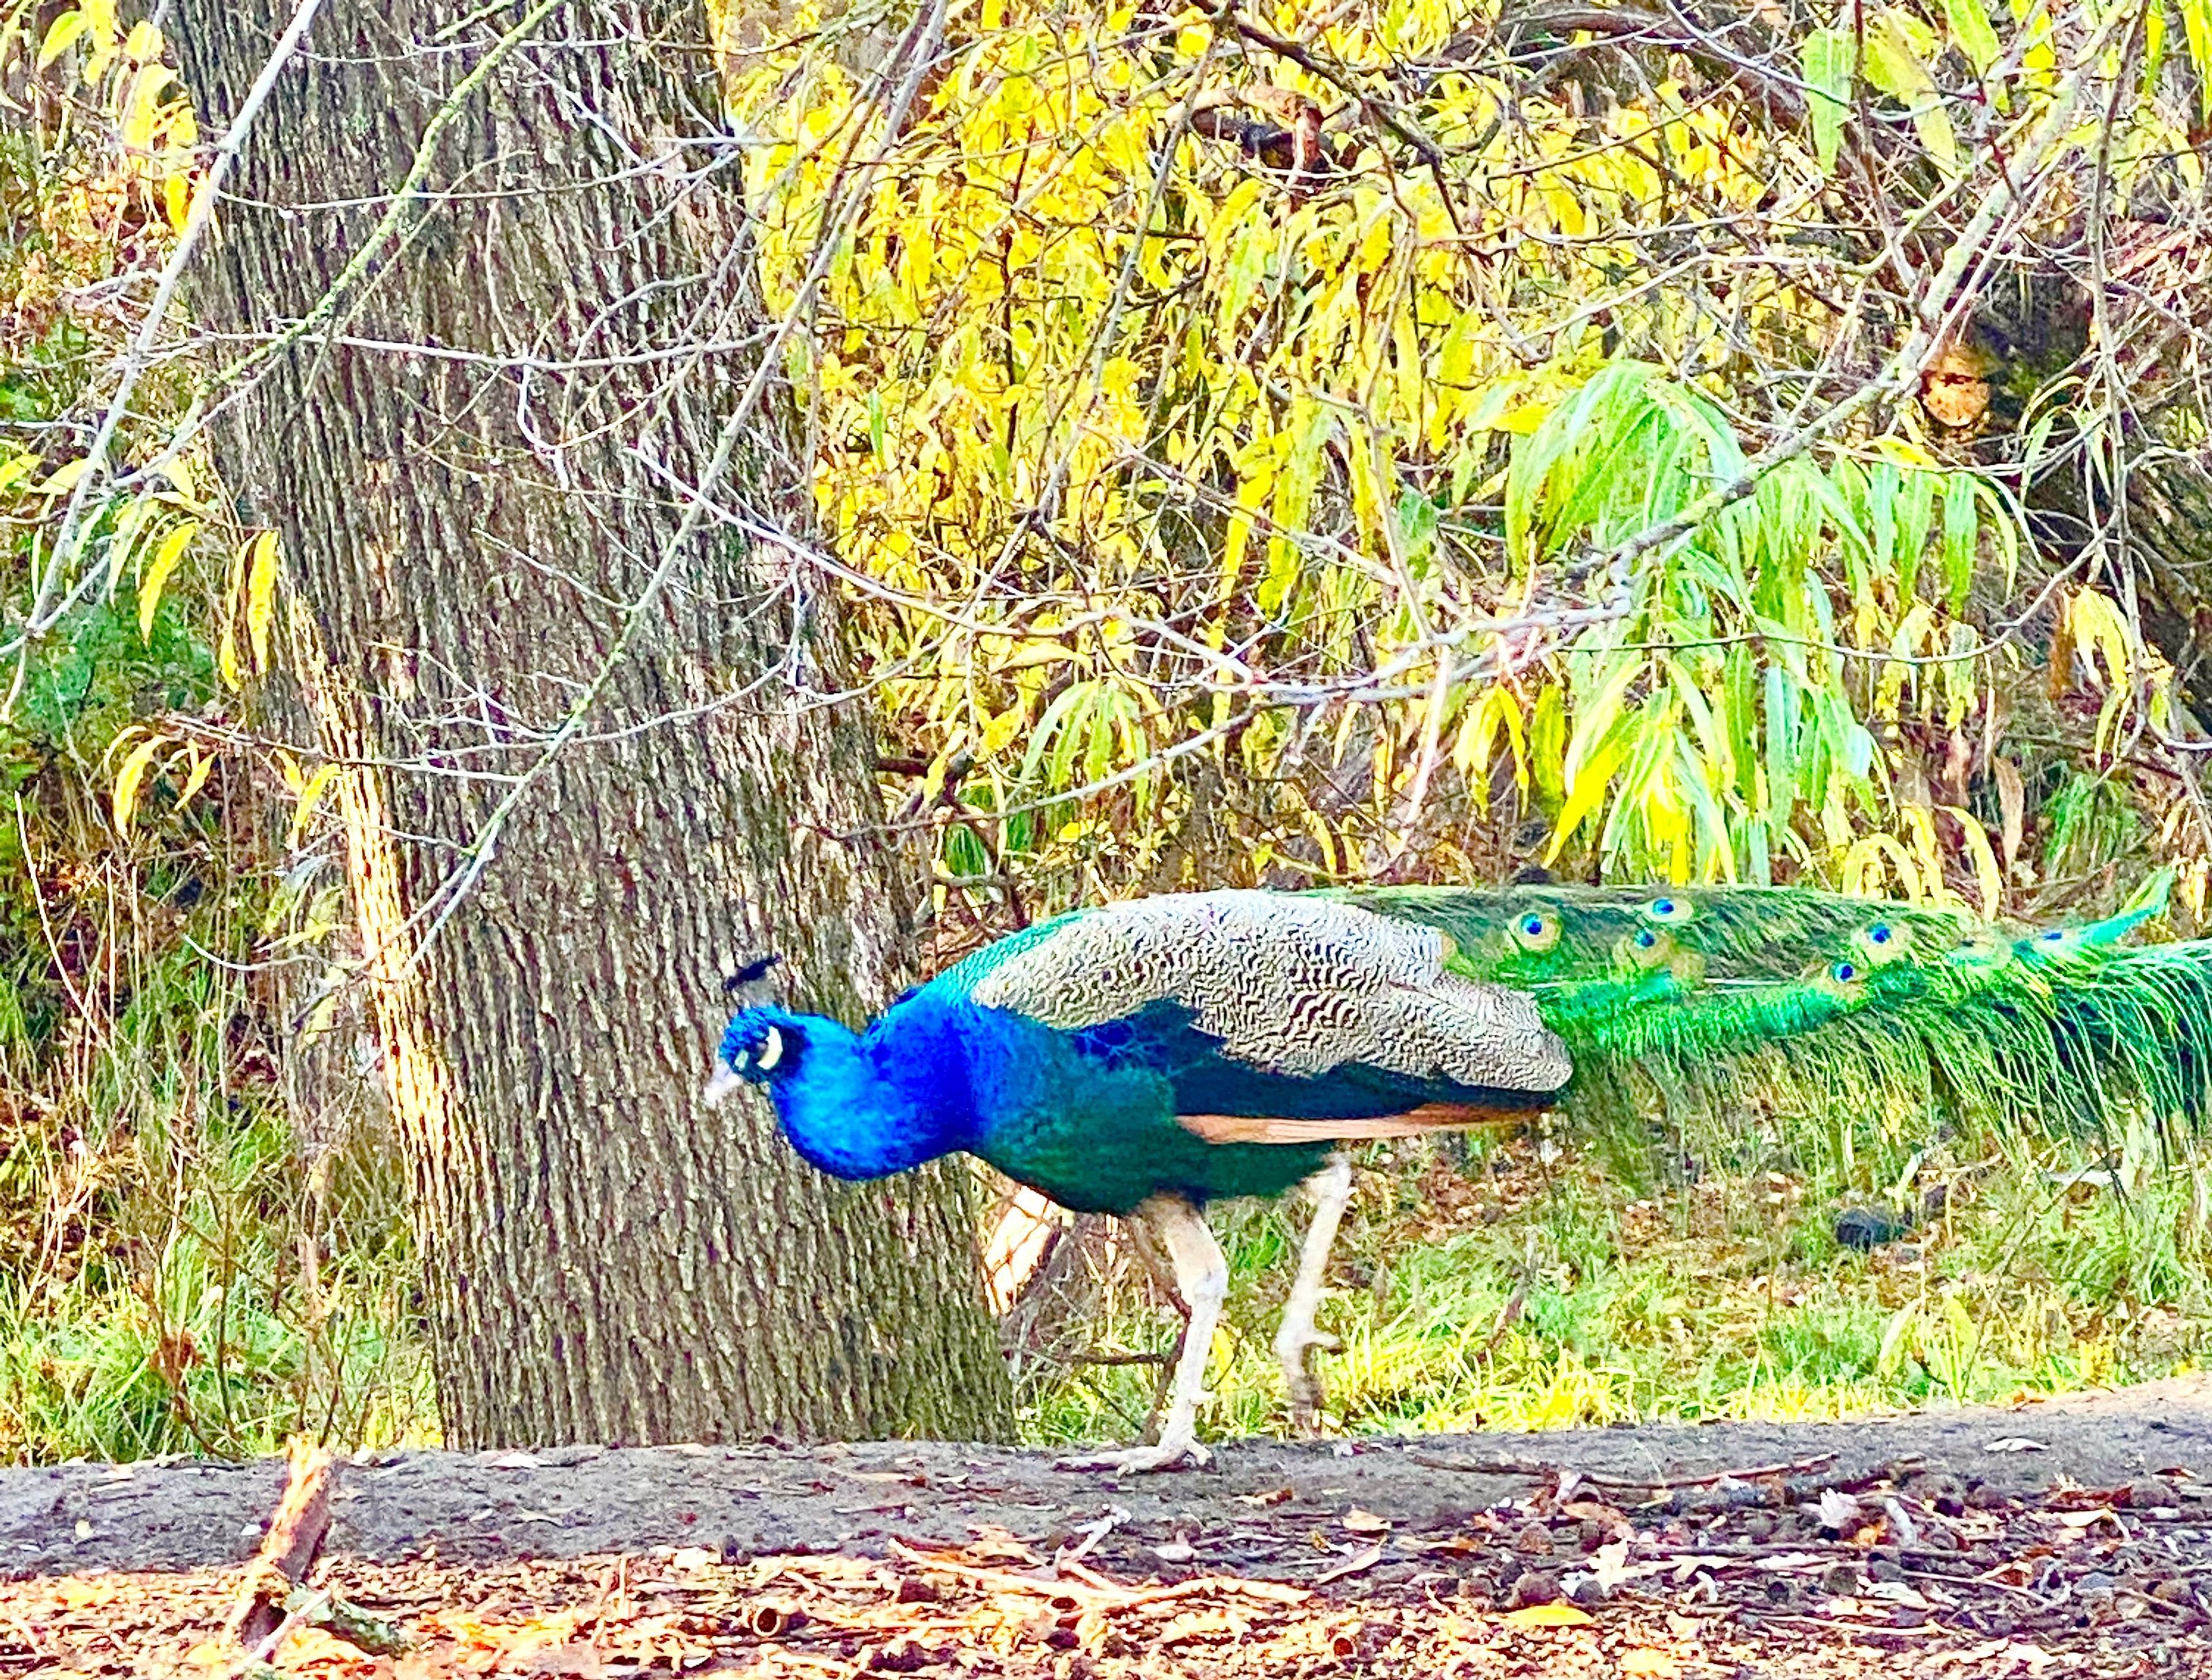 Peafowl from Dunnell Nature Center in Fairfield, CA